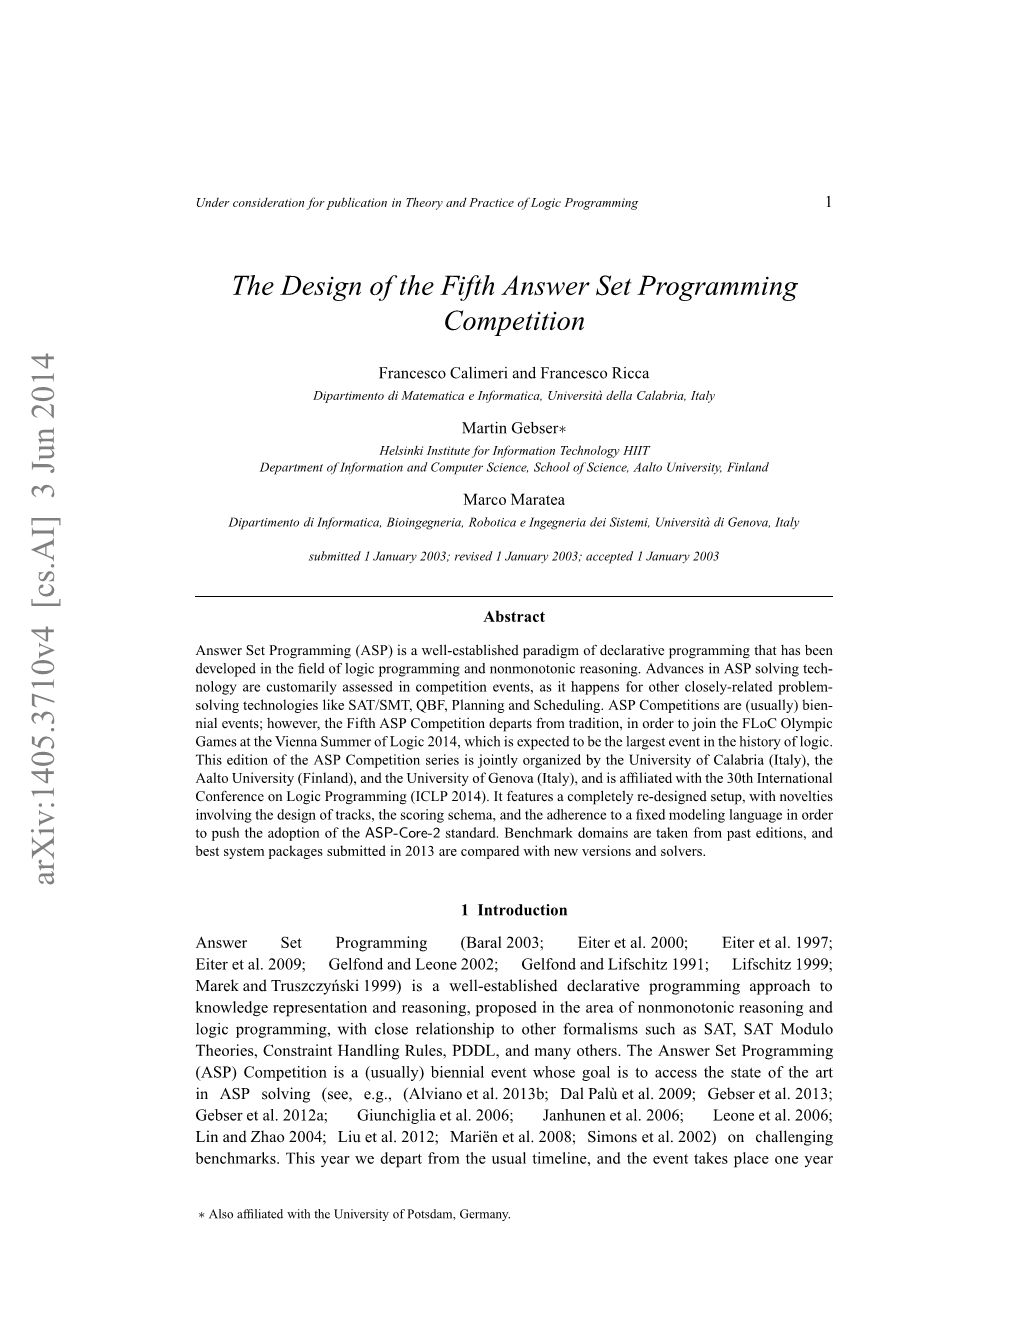 The Design of the Fifth Answer Set Programming Competition 3 the Main Goal of the Competition Series